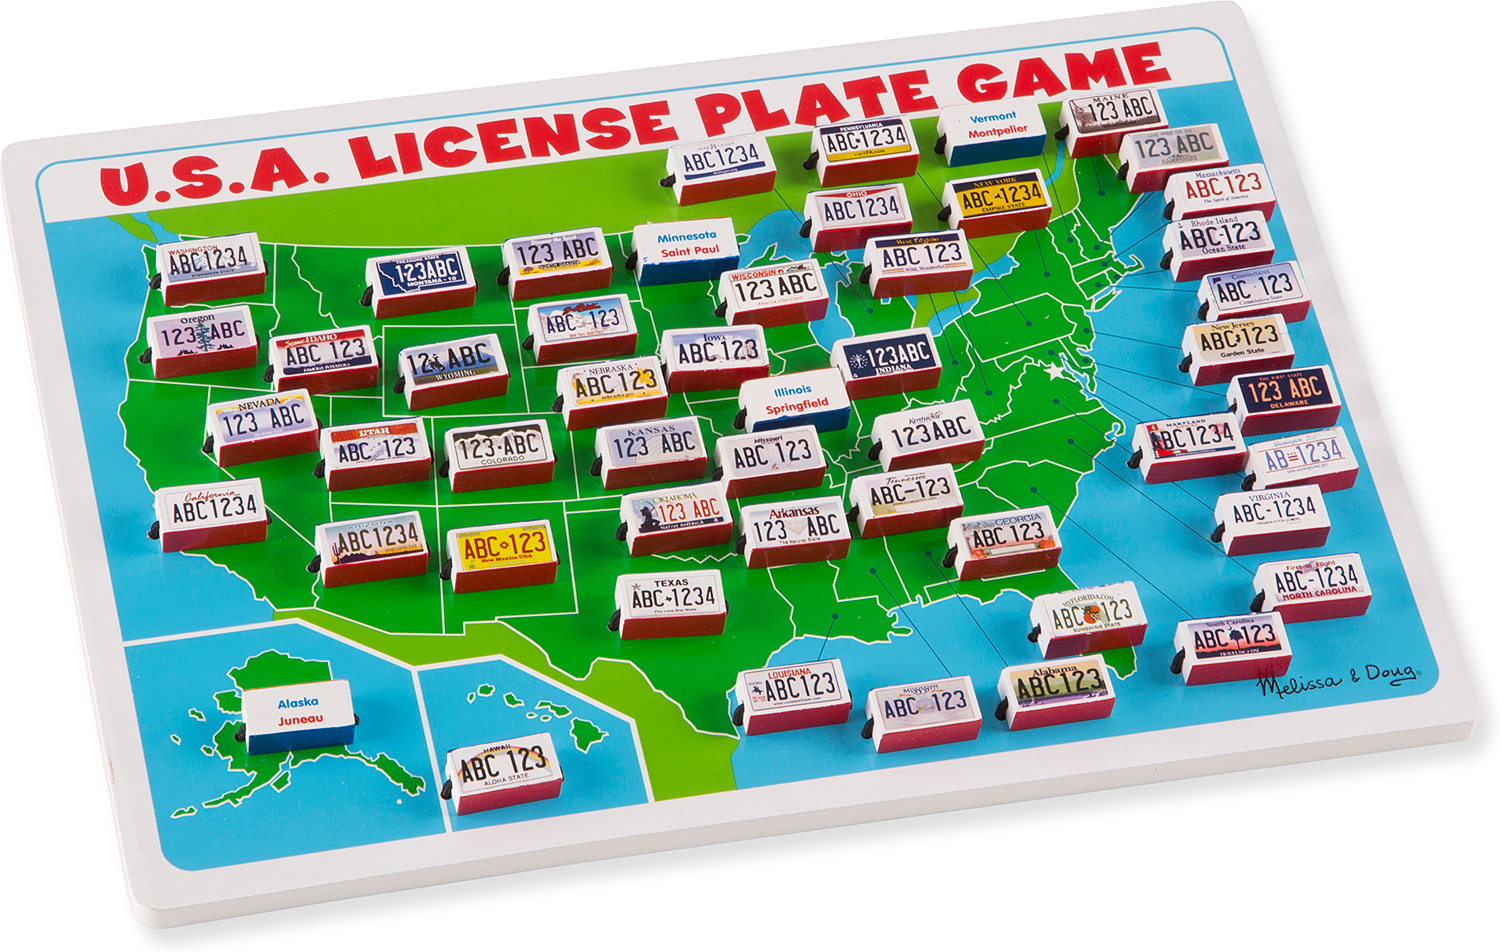 u-s-a-license-plate-game-travel-game-from-melissa-doug-school-crossing